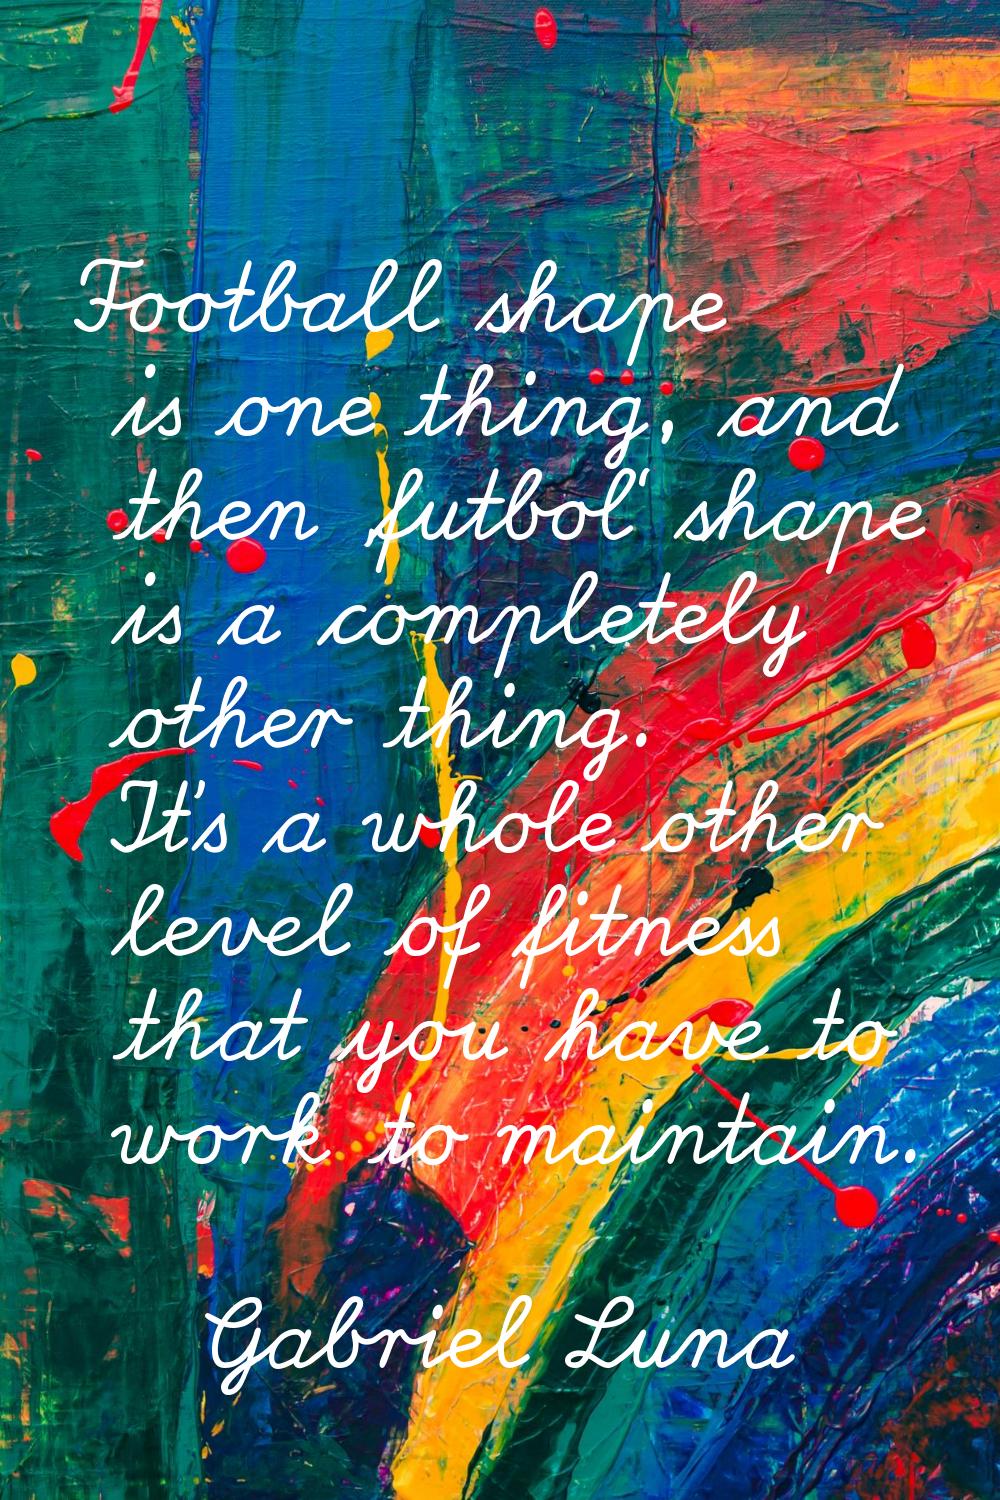 Football shape is one thing, and then 'futbol' shape is a completely other thing. It's a whole othe